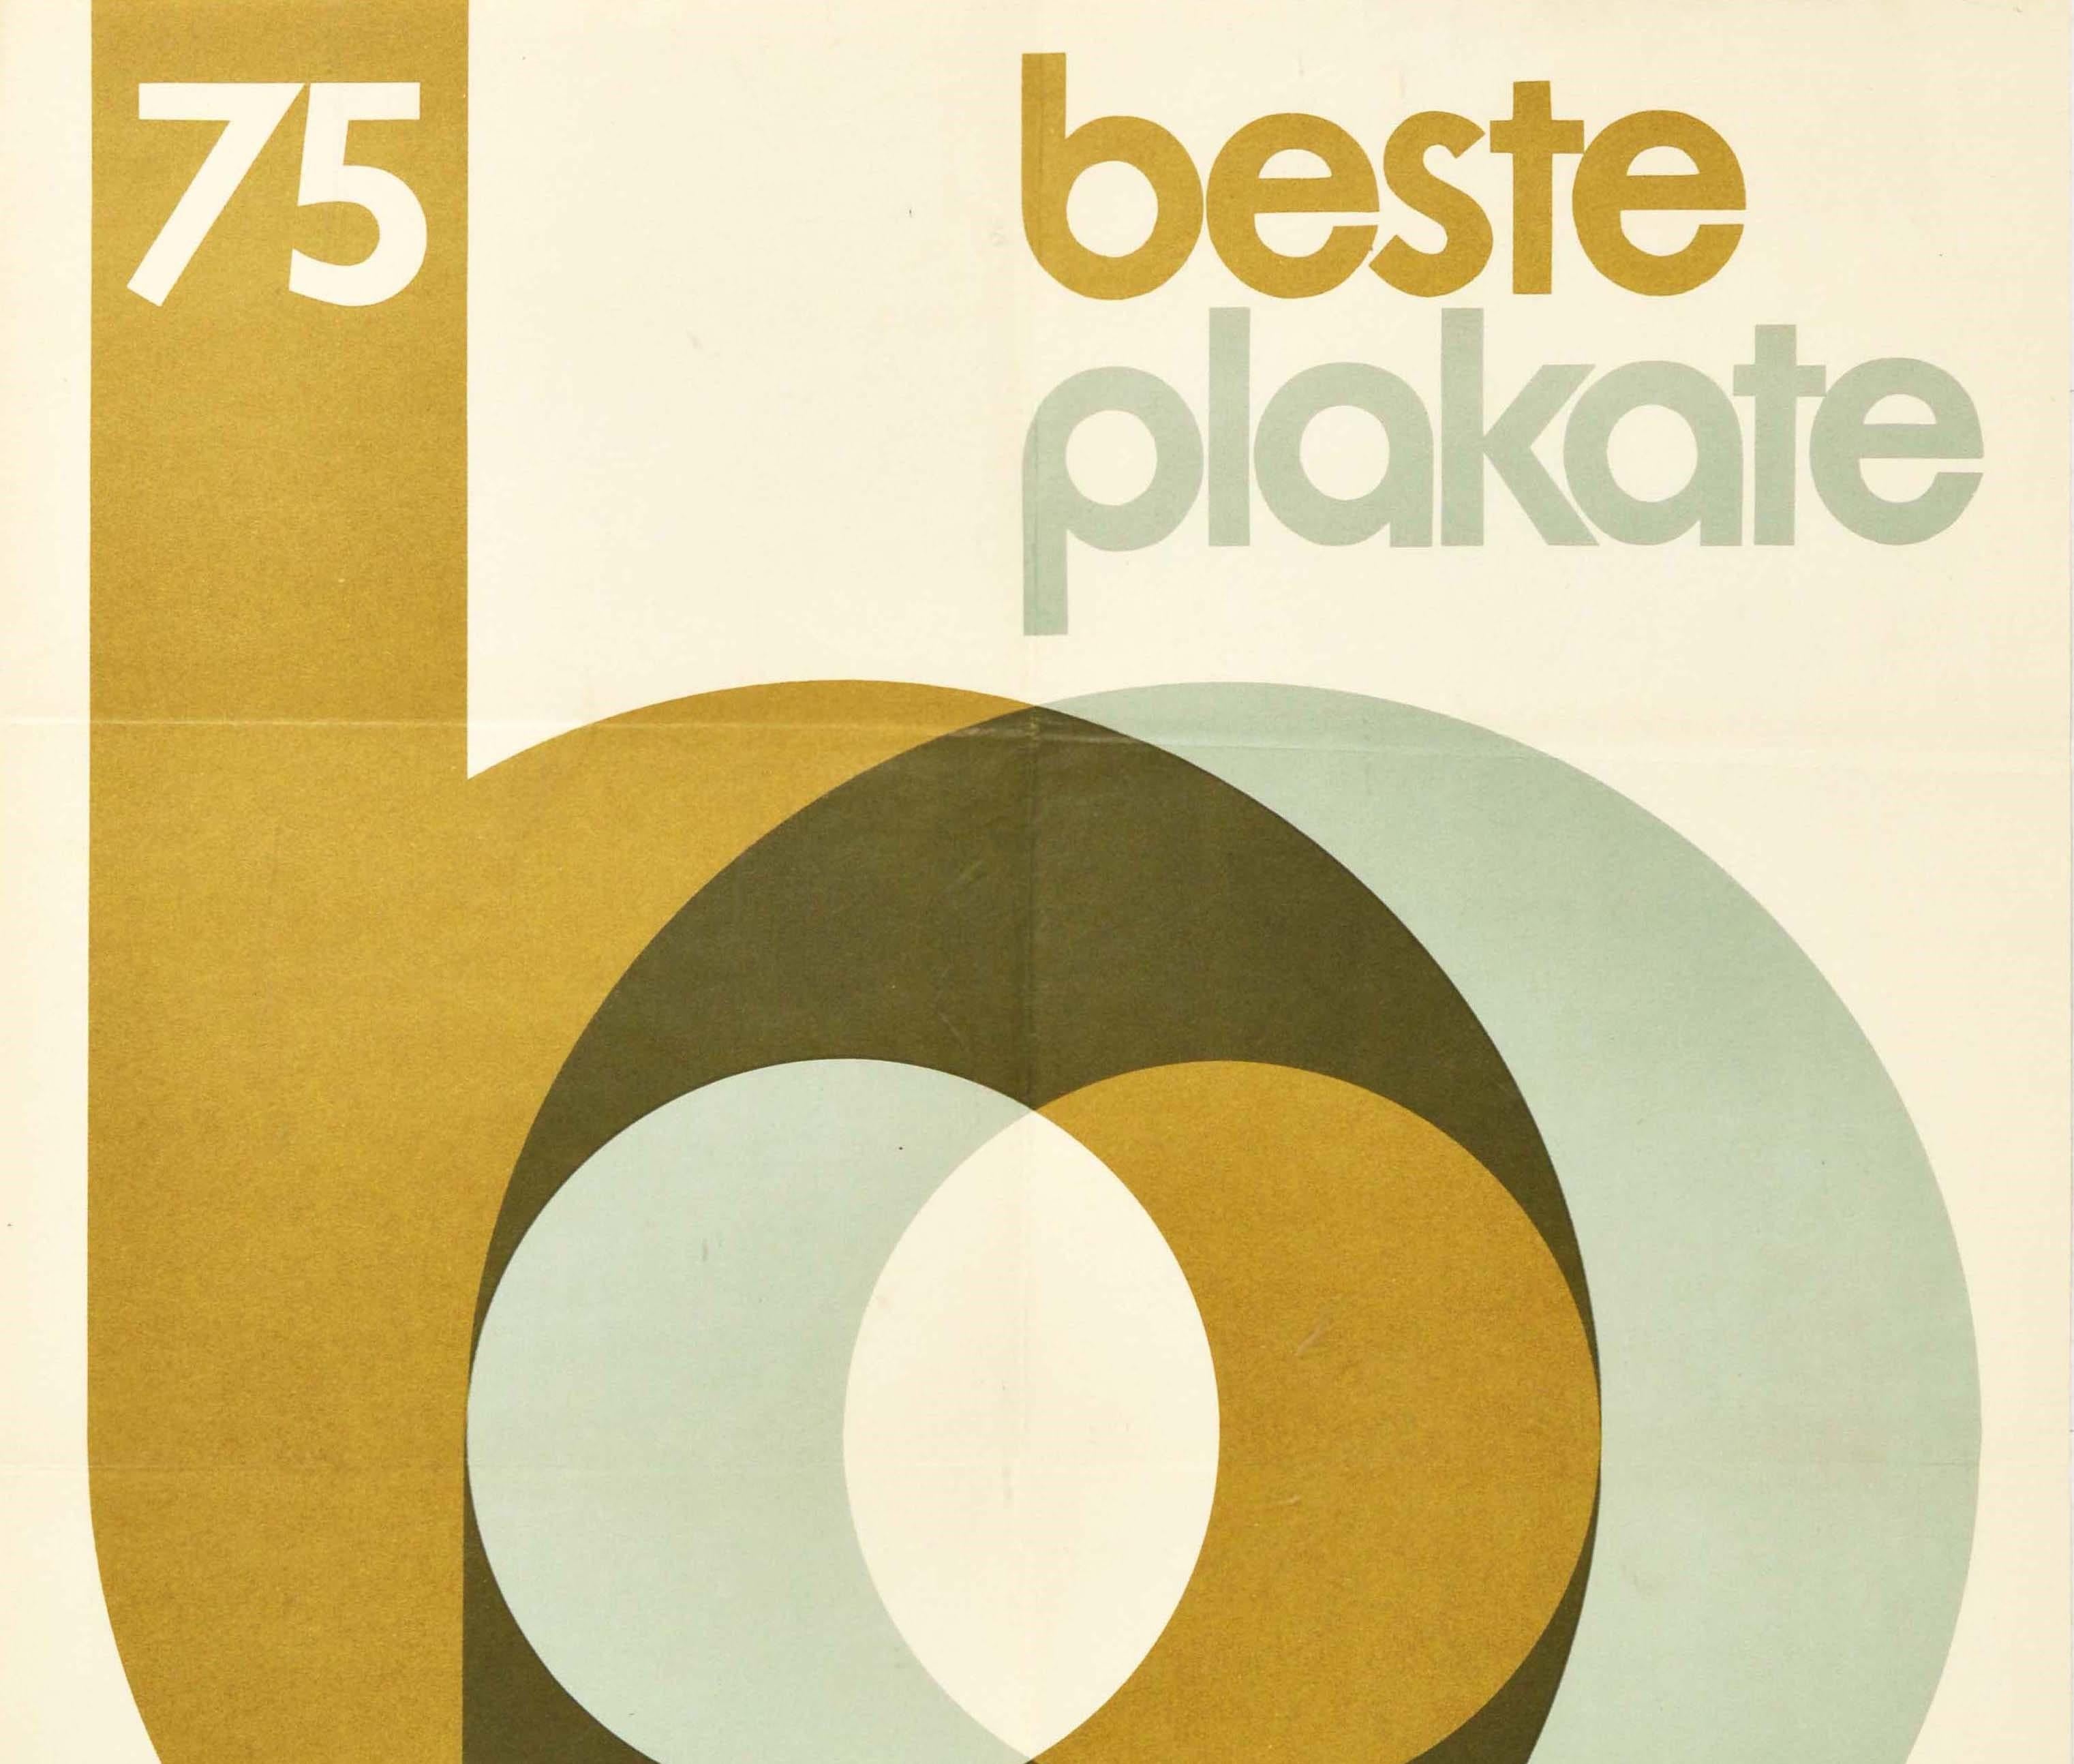 Original vintage poster for an Exhibition of the Best Posters of 1975 held from 1 to 27 June 1976 in the Exhibition Centre of the Television Tower in Berlin - Beste Plakate 75 - featuring a great graphic design depicting the small letters B and P on